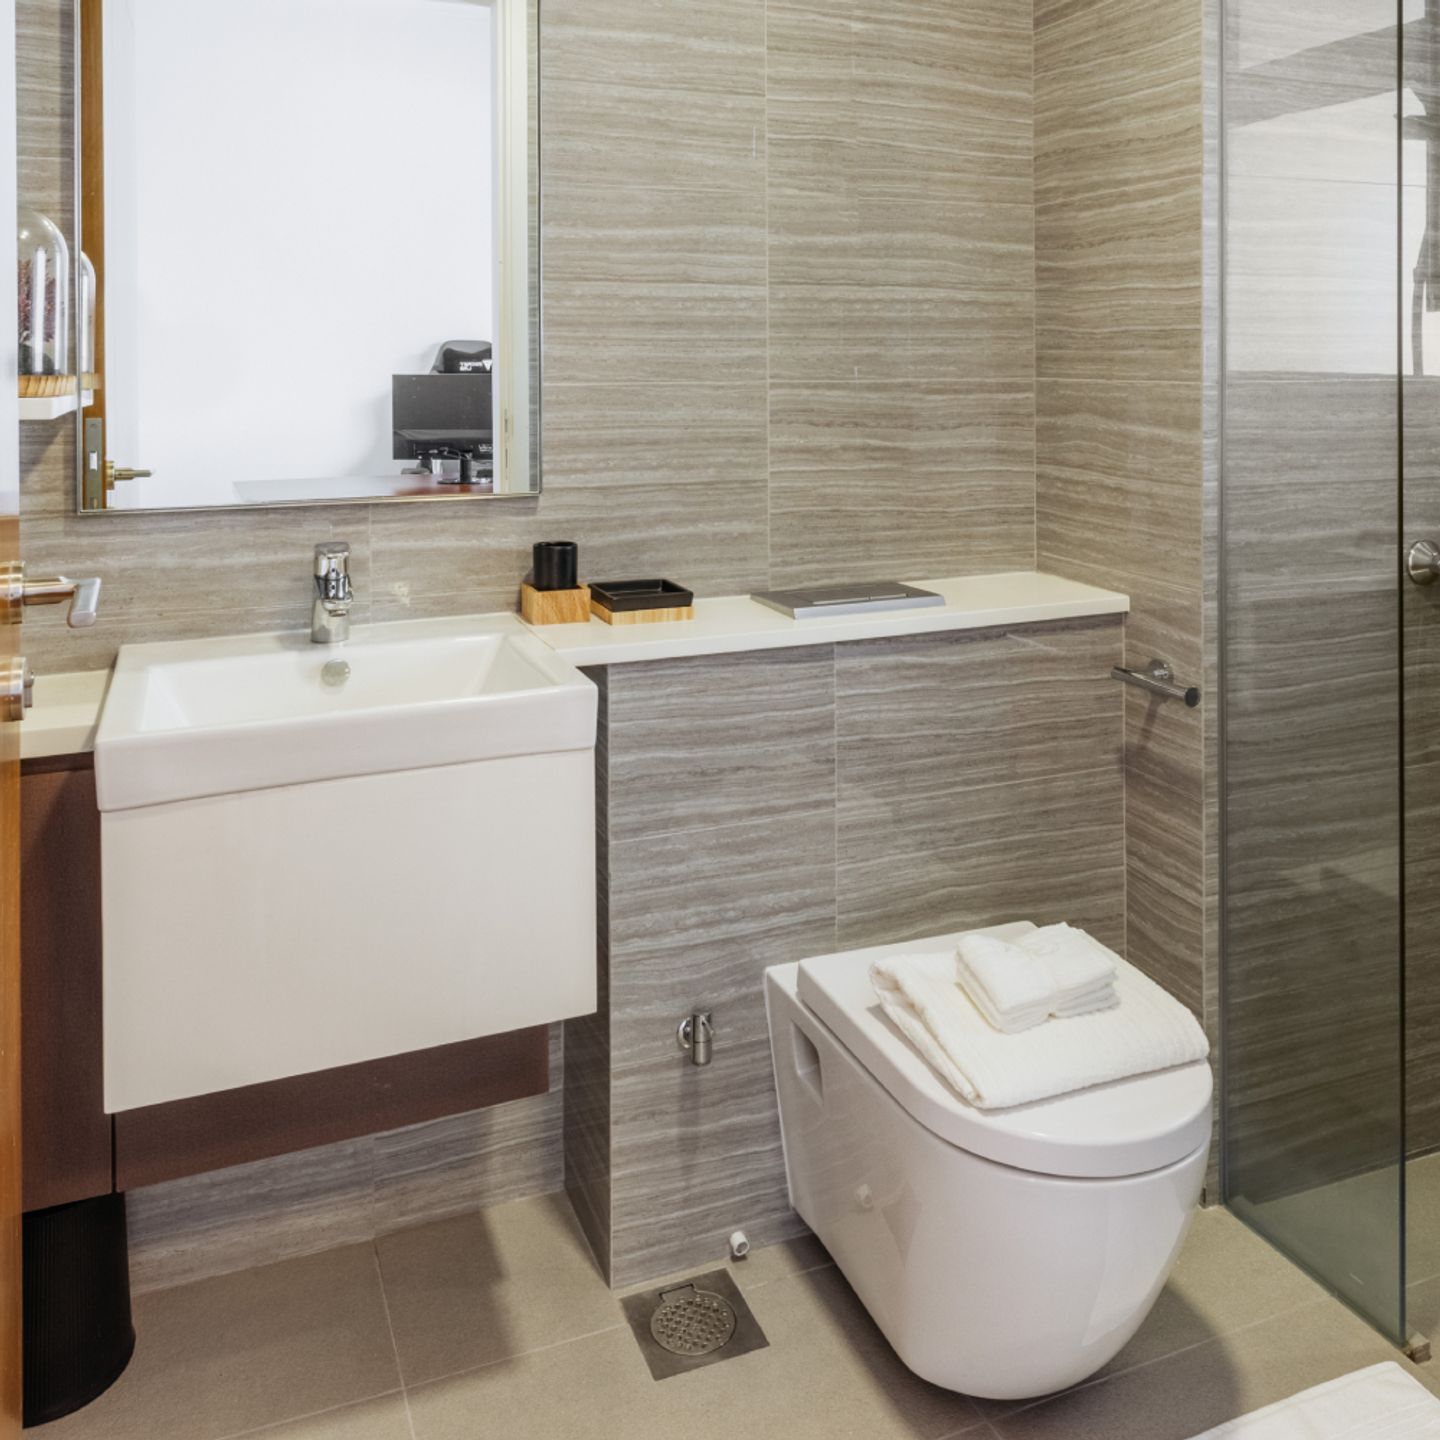 Modern White And Grey Bathroom Design With A Shower Cubicle